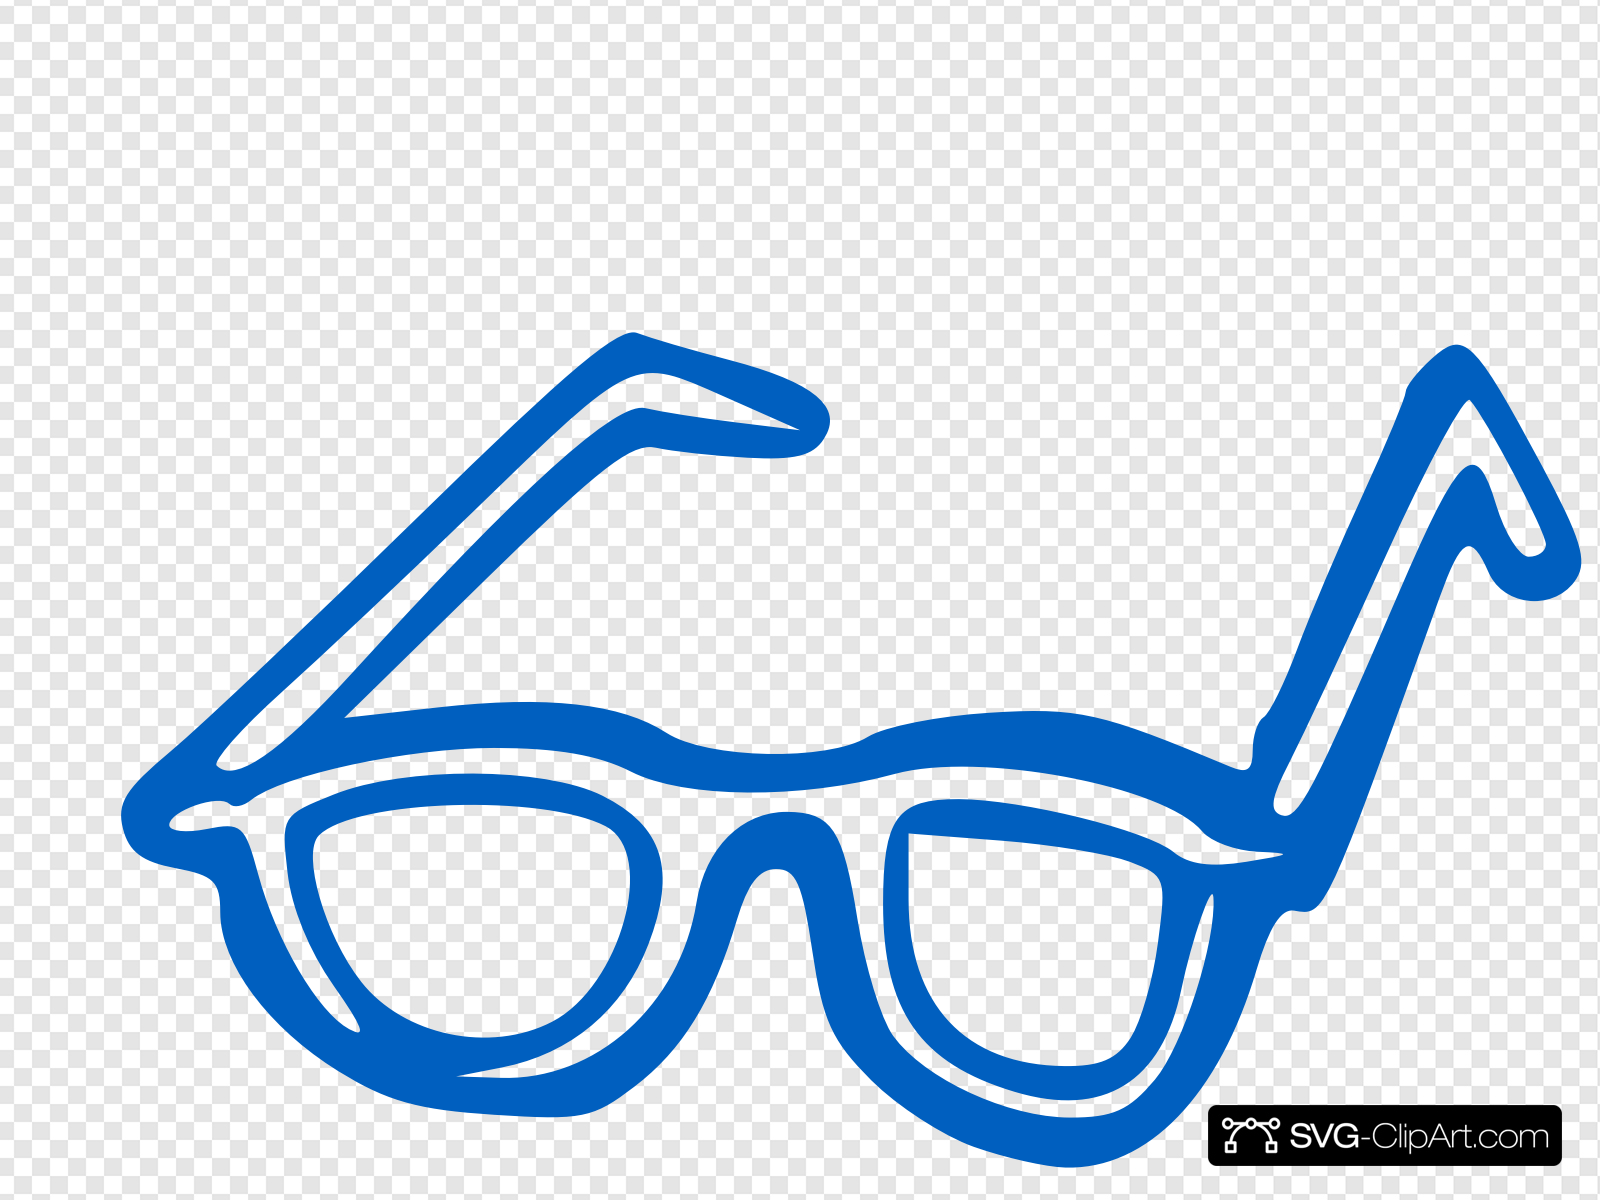 Blue Eye Glasses Clip art, Icon and SVG